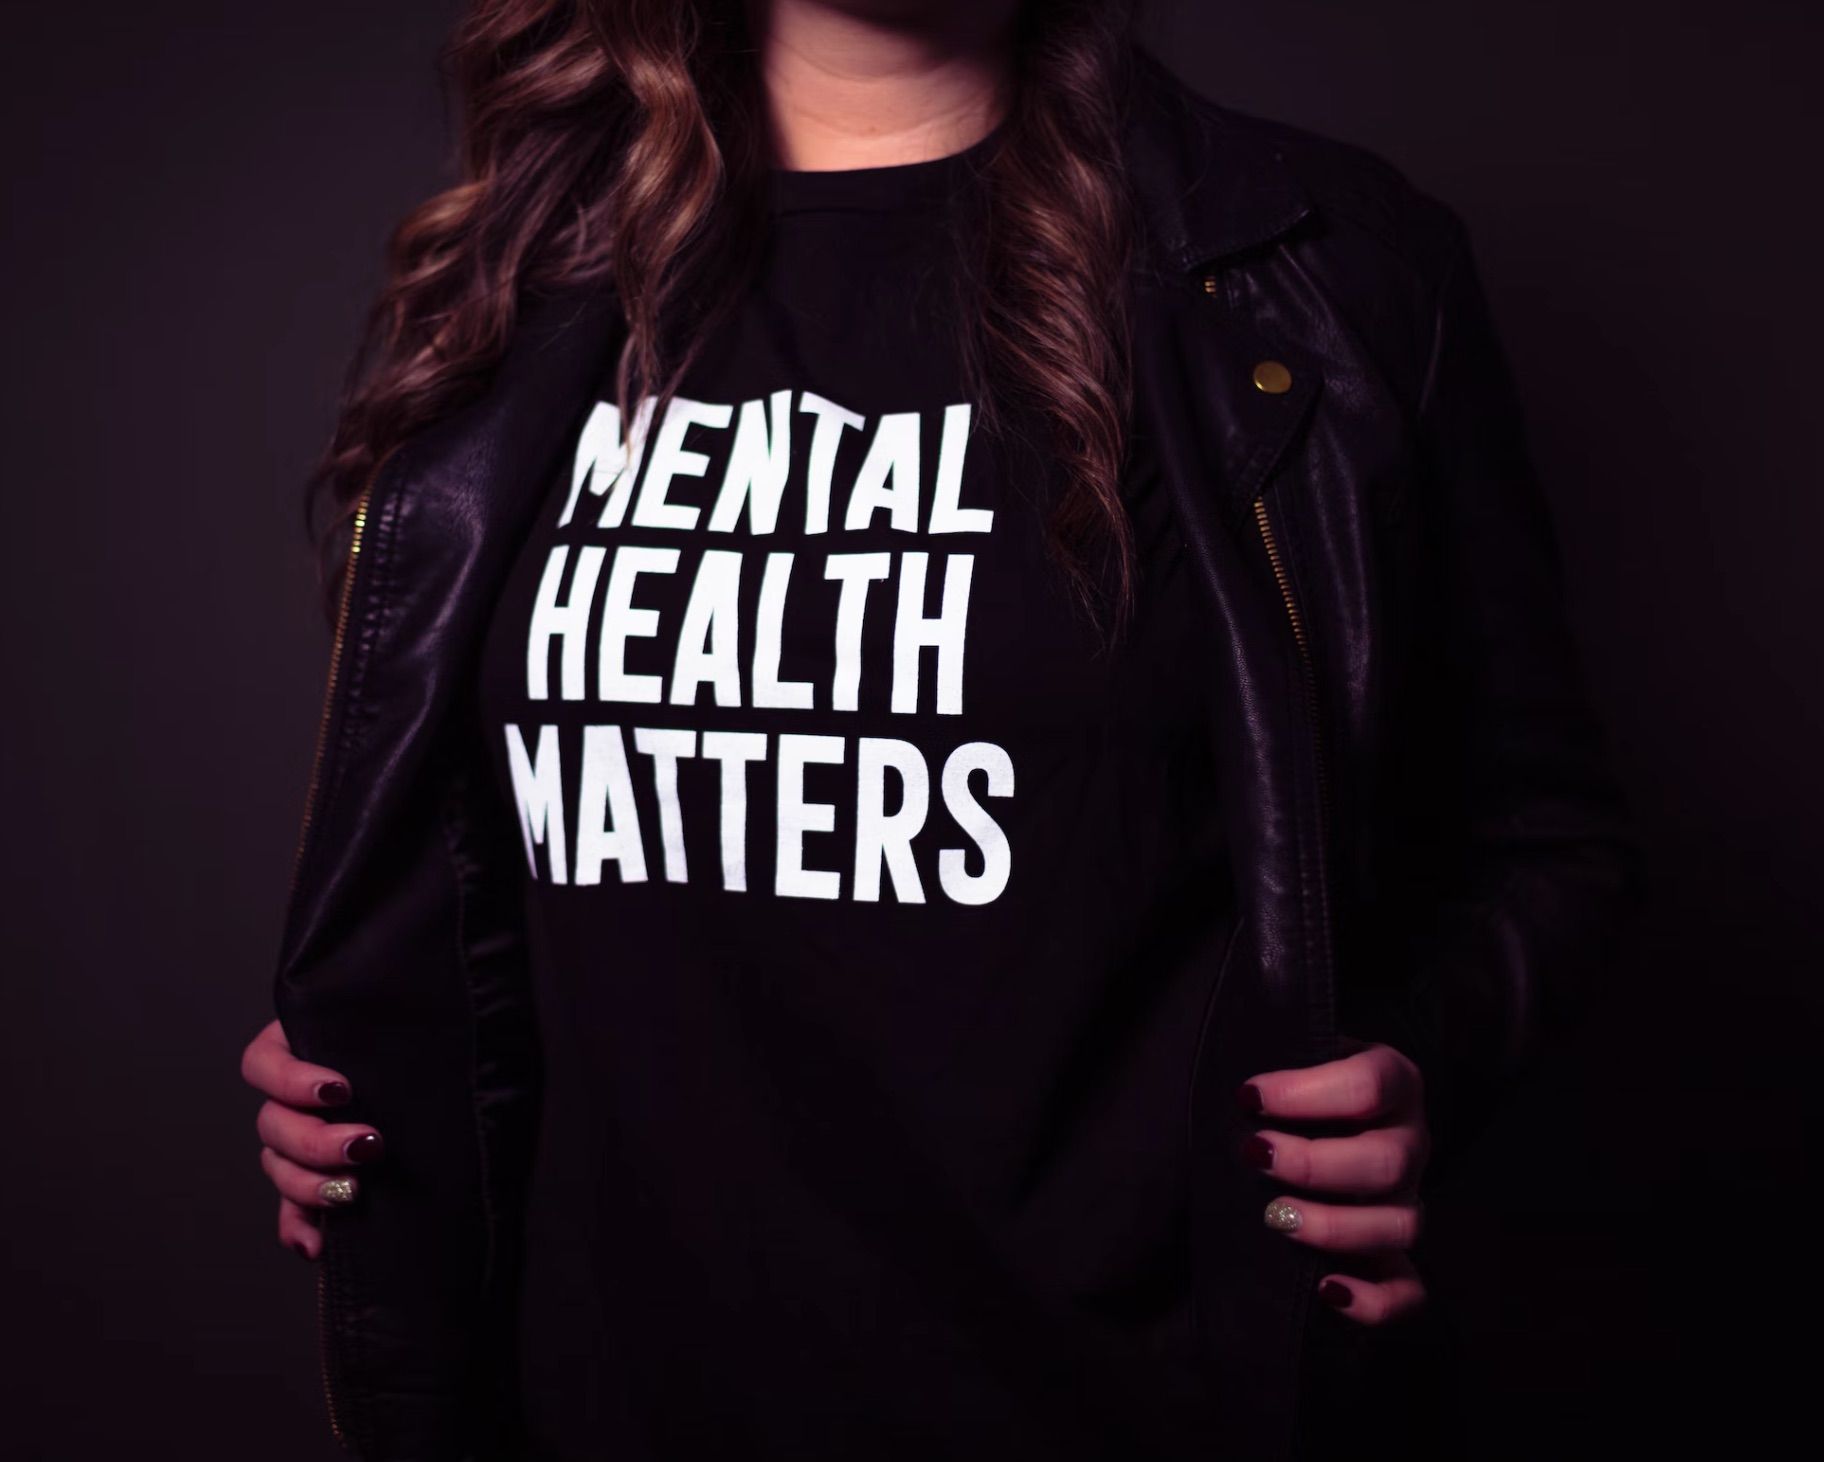 Photo of a person's torso wearing a black t-shirt that says, "Mental Health Matters" in white letters